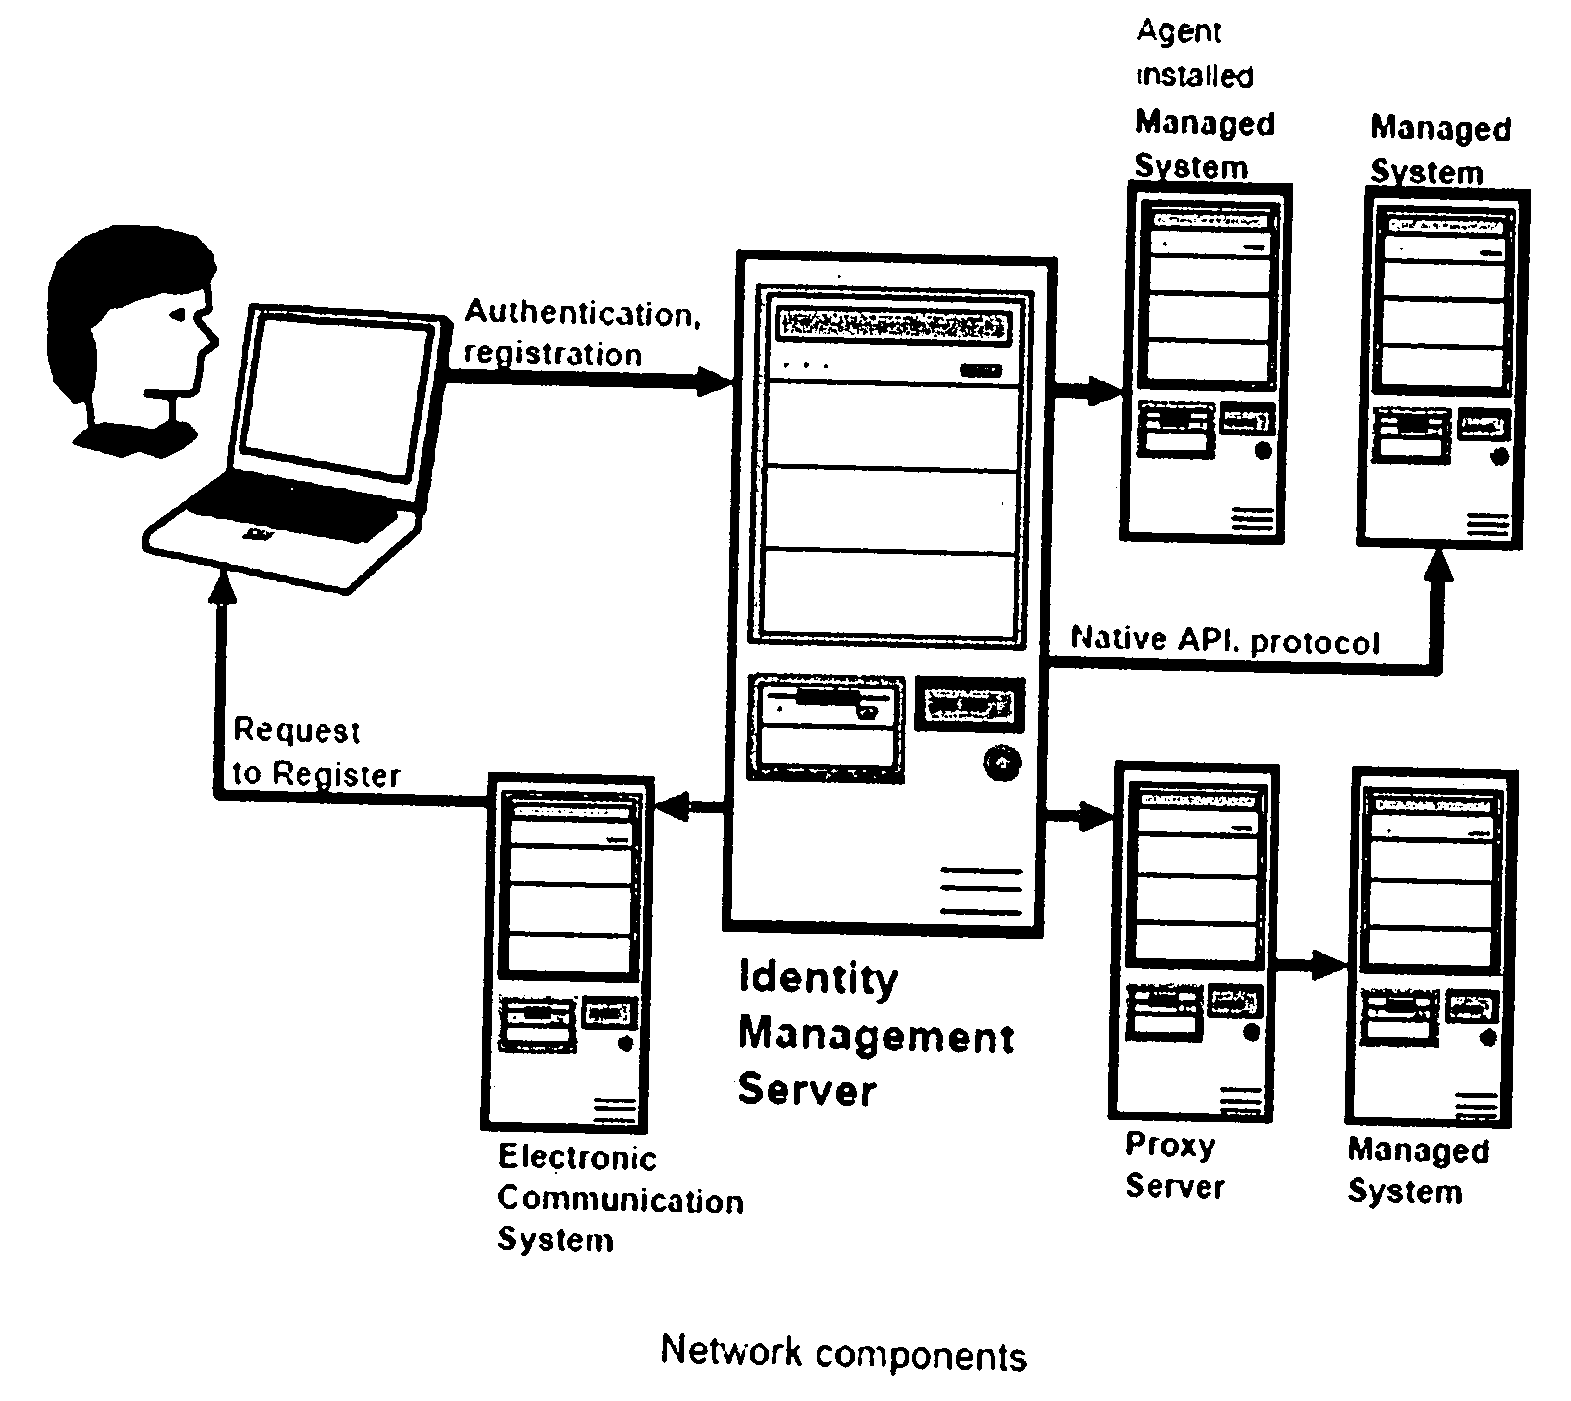 Process for automated and self-service reconciliation of different loging IDs between networked computer systems